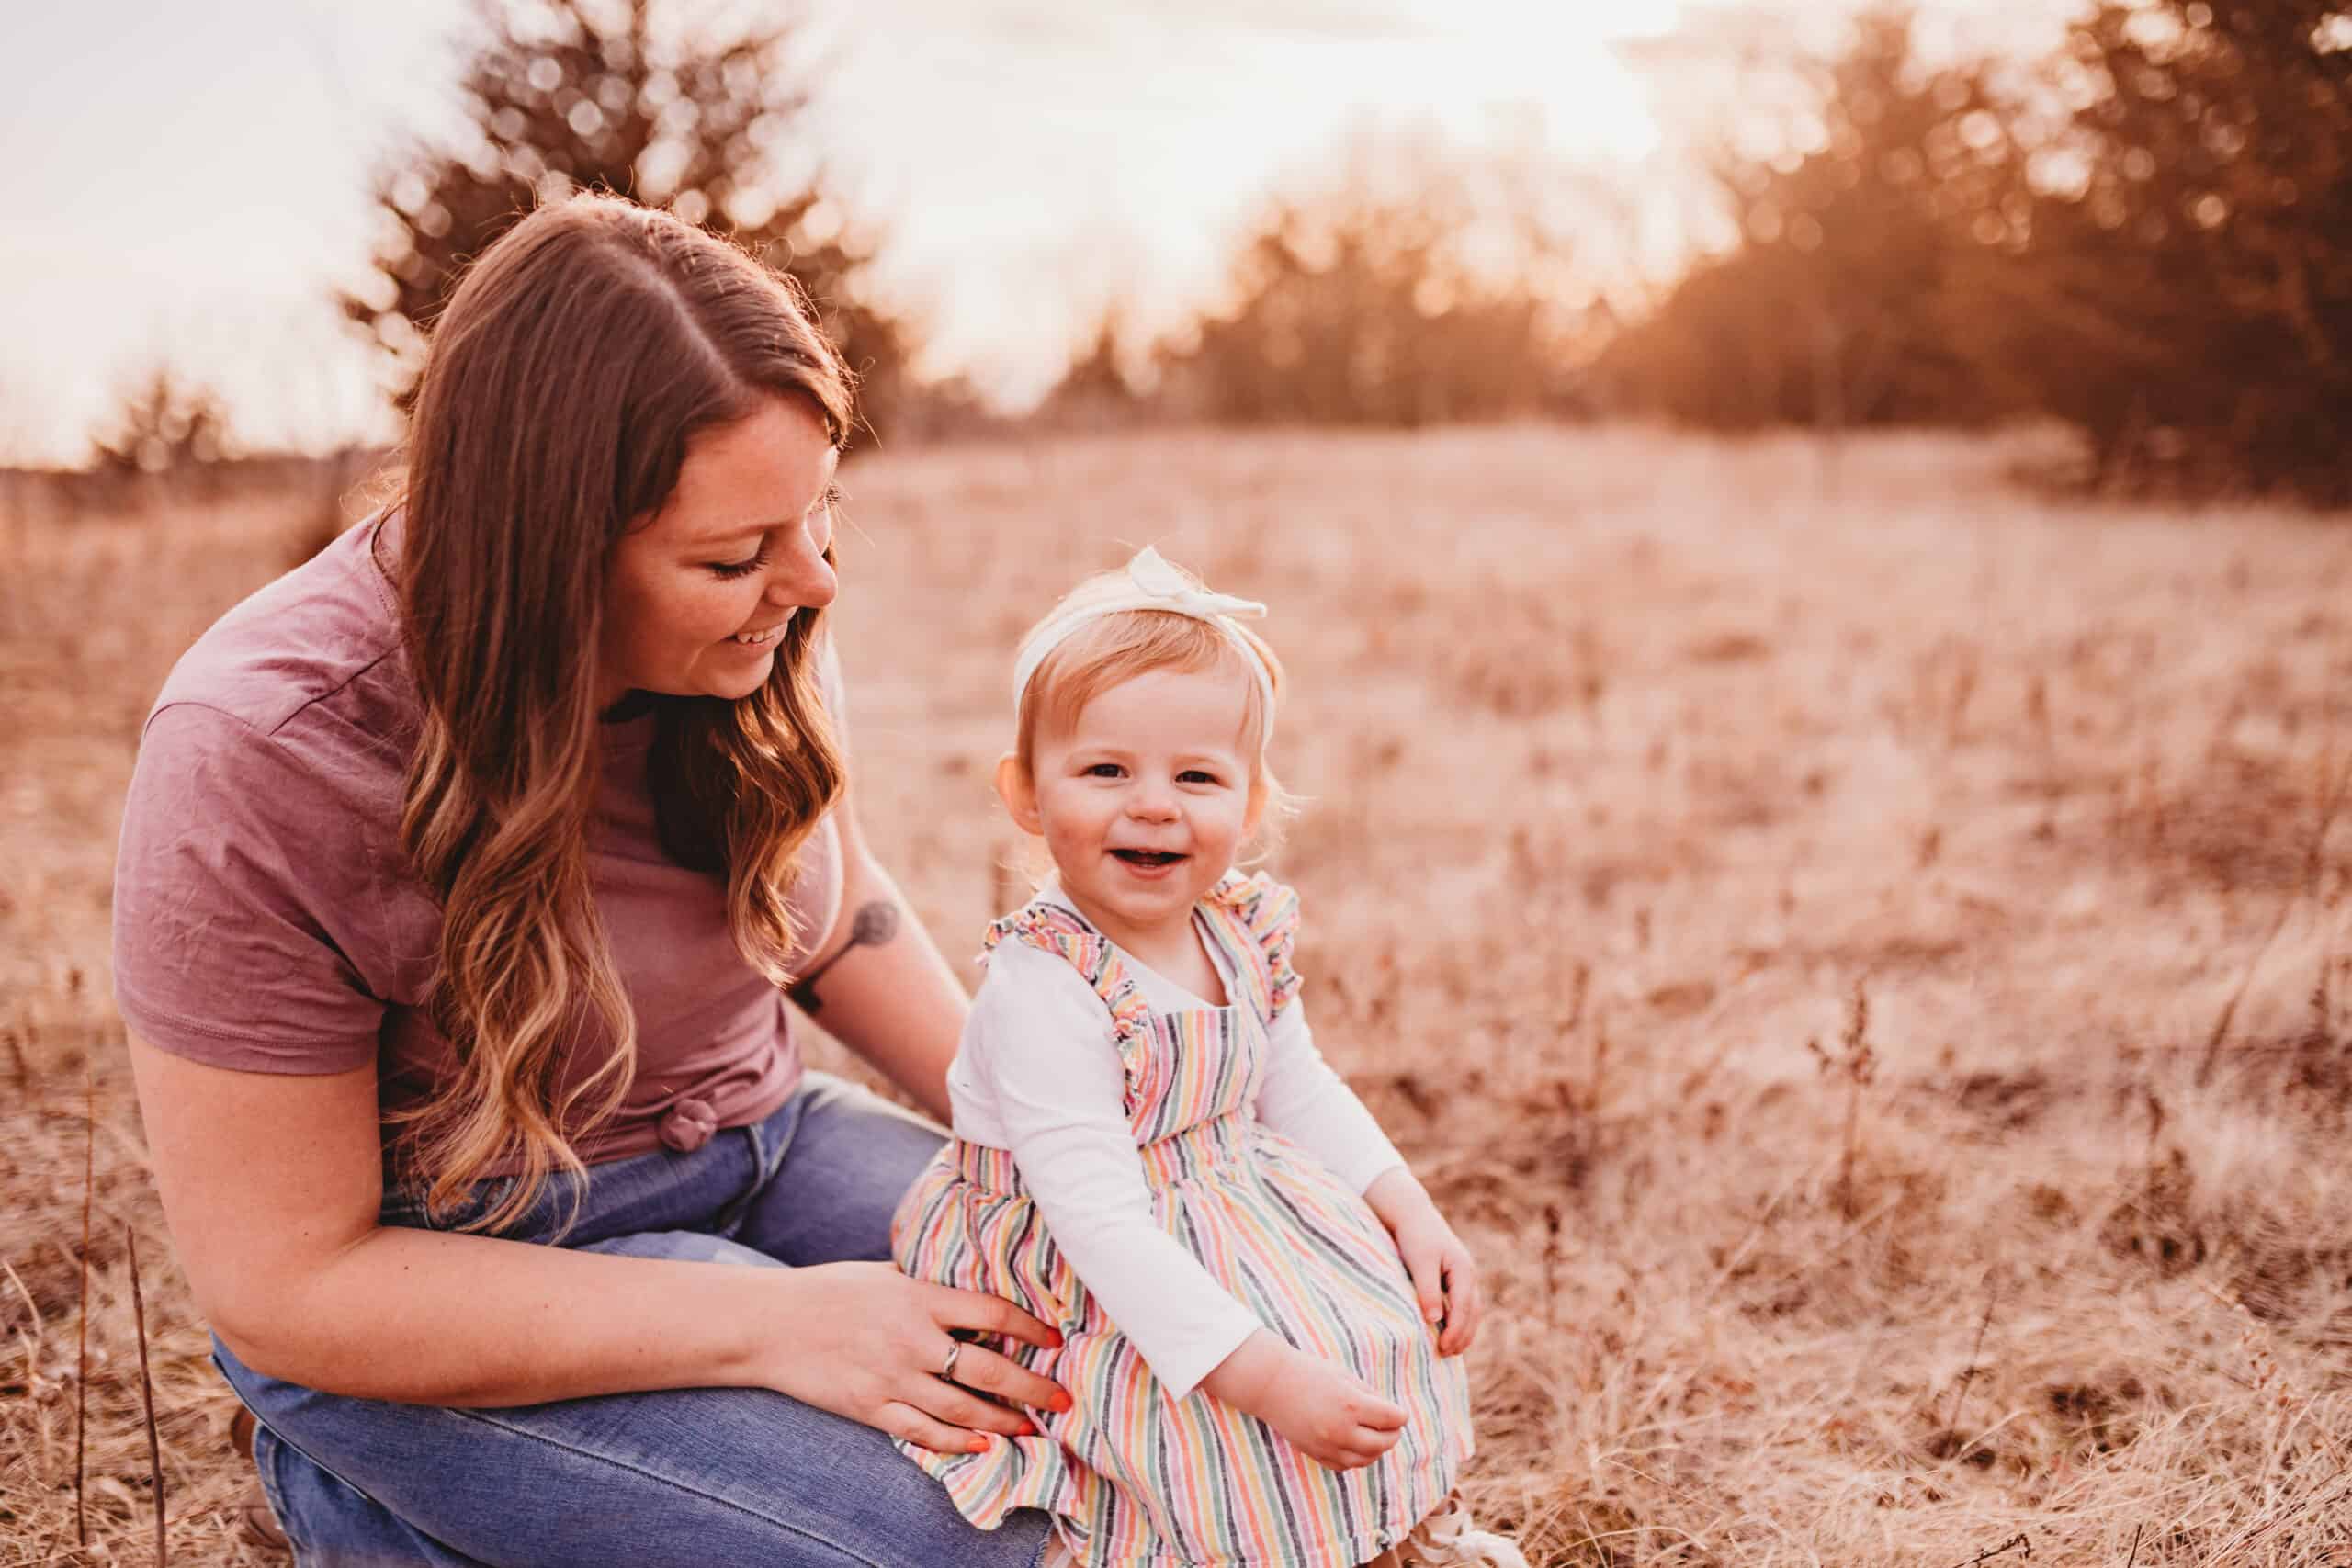 Being a happy mom sometimes feels elusive, but I'm here to tell you, it's possible.